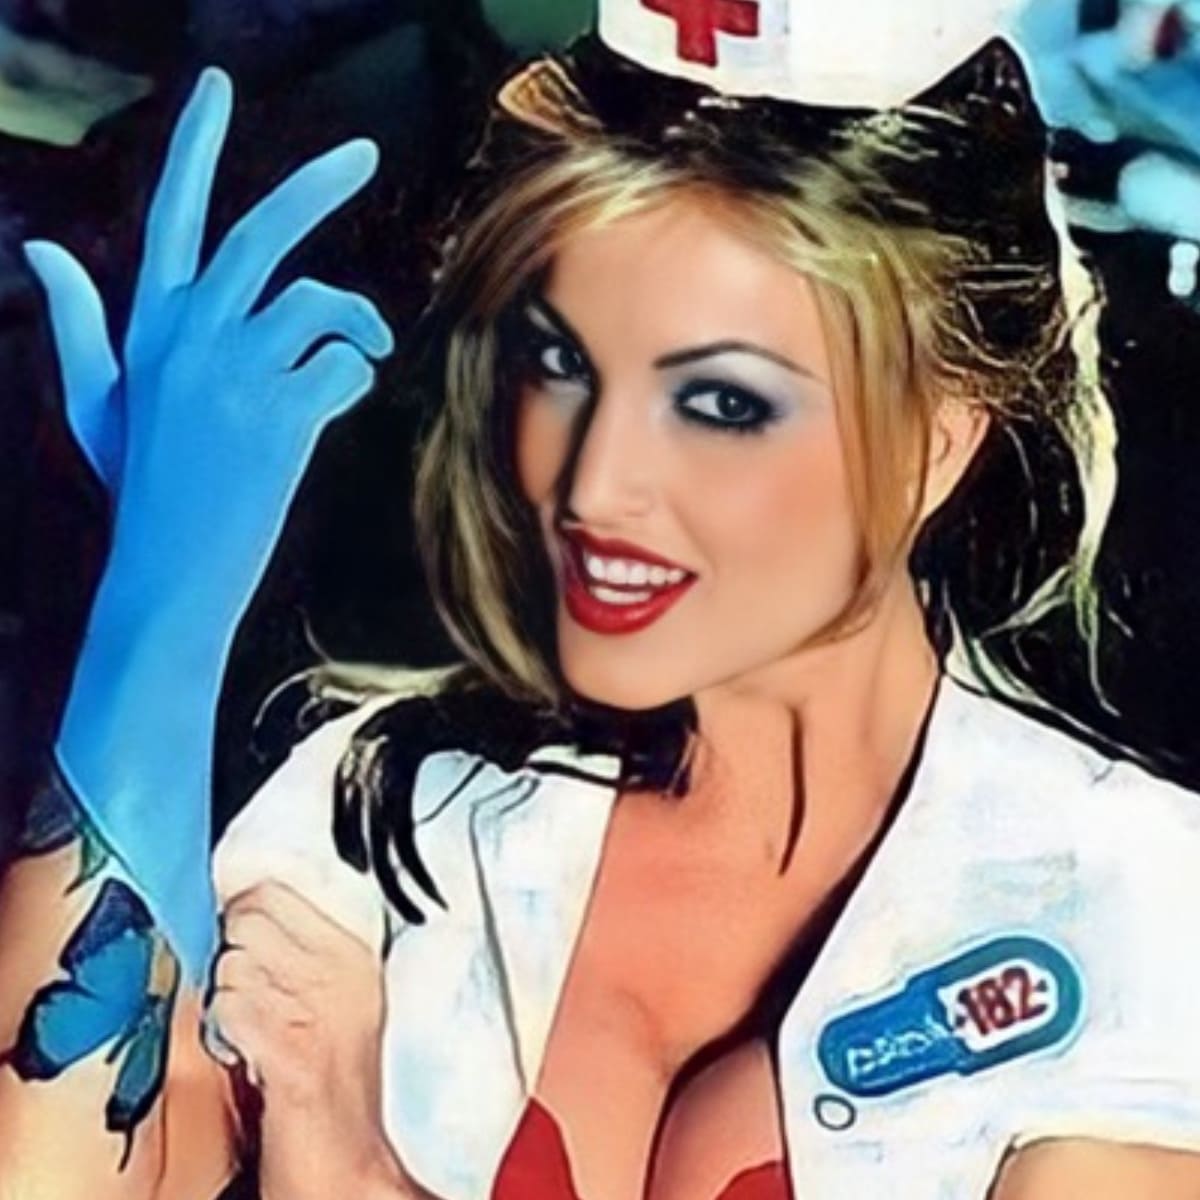 The cover of the album "Enema of the State" by Blink-182.